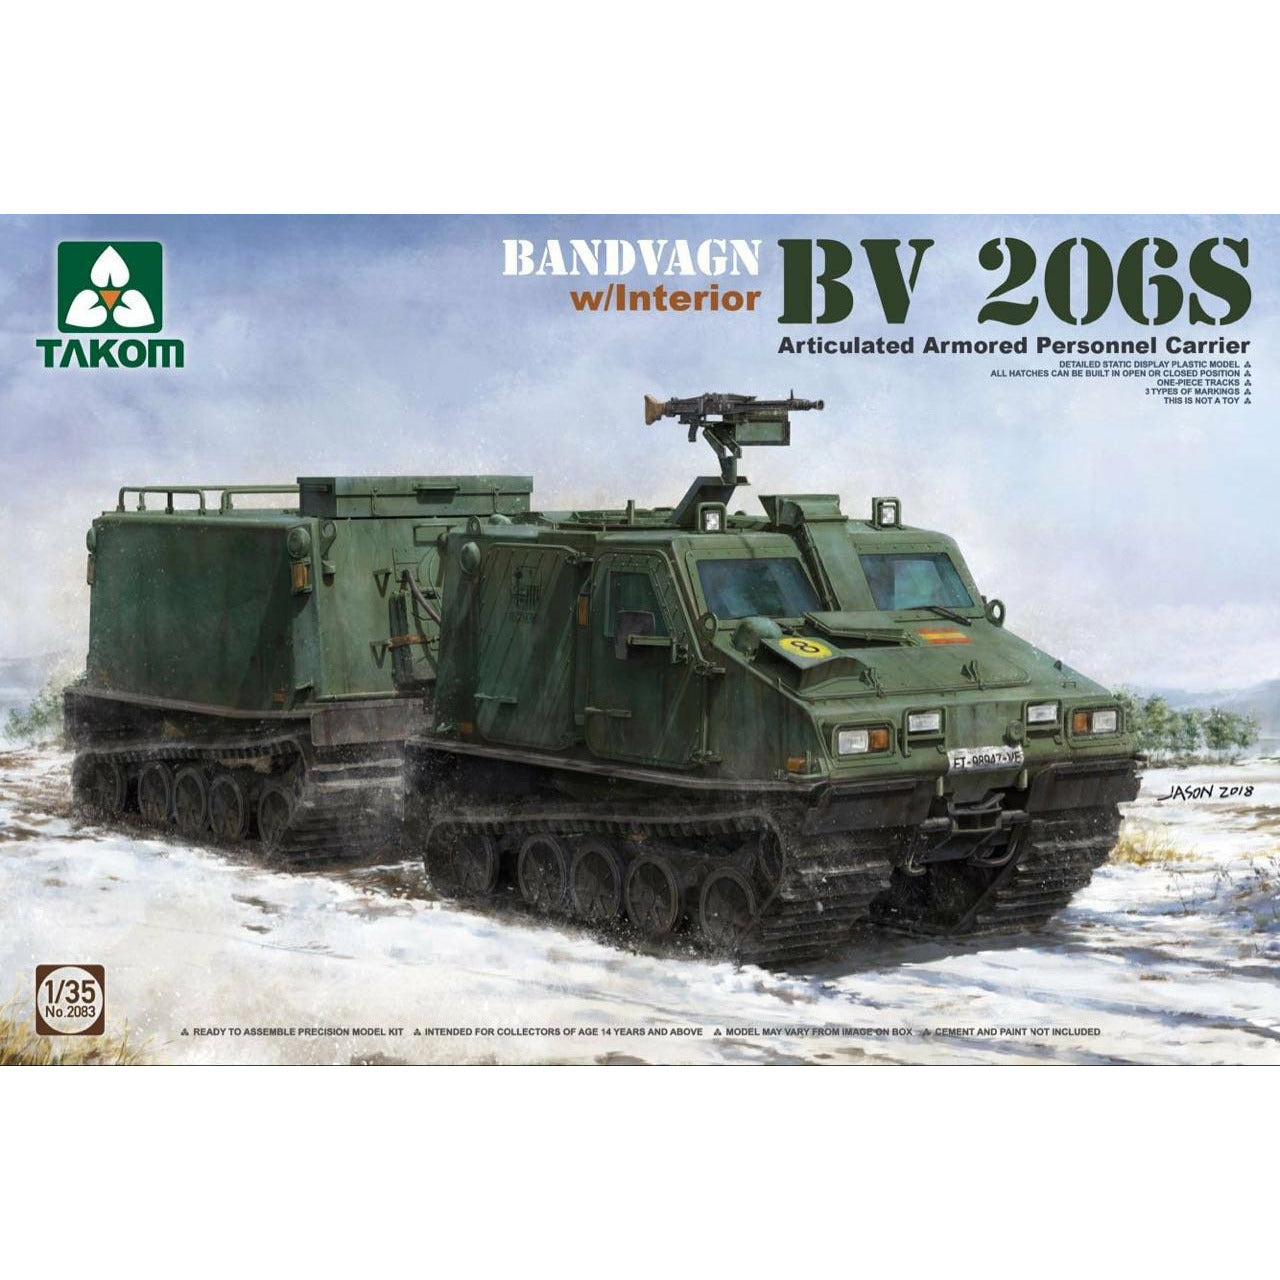 Articulated Armored Personnel Carrier BV 206S Badwagn w/Interior 1/35 #2083 by Takom